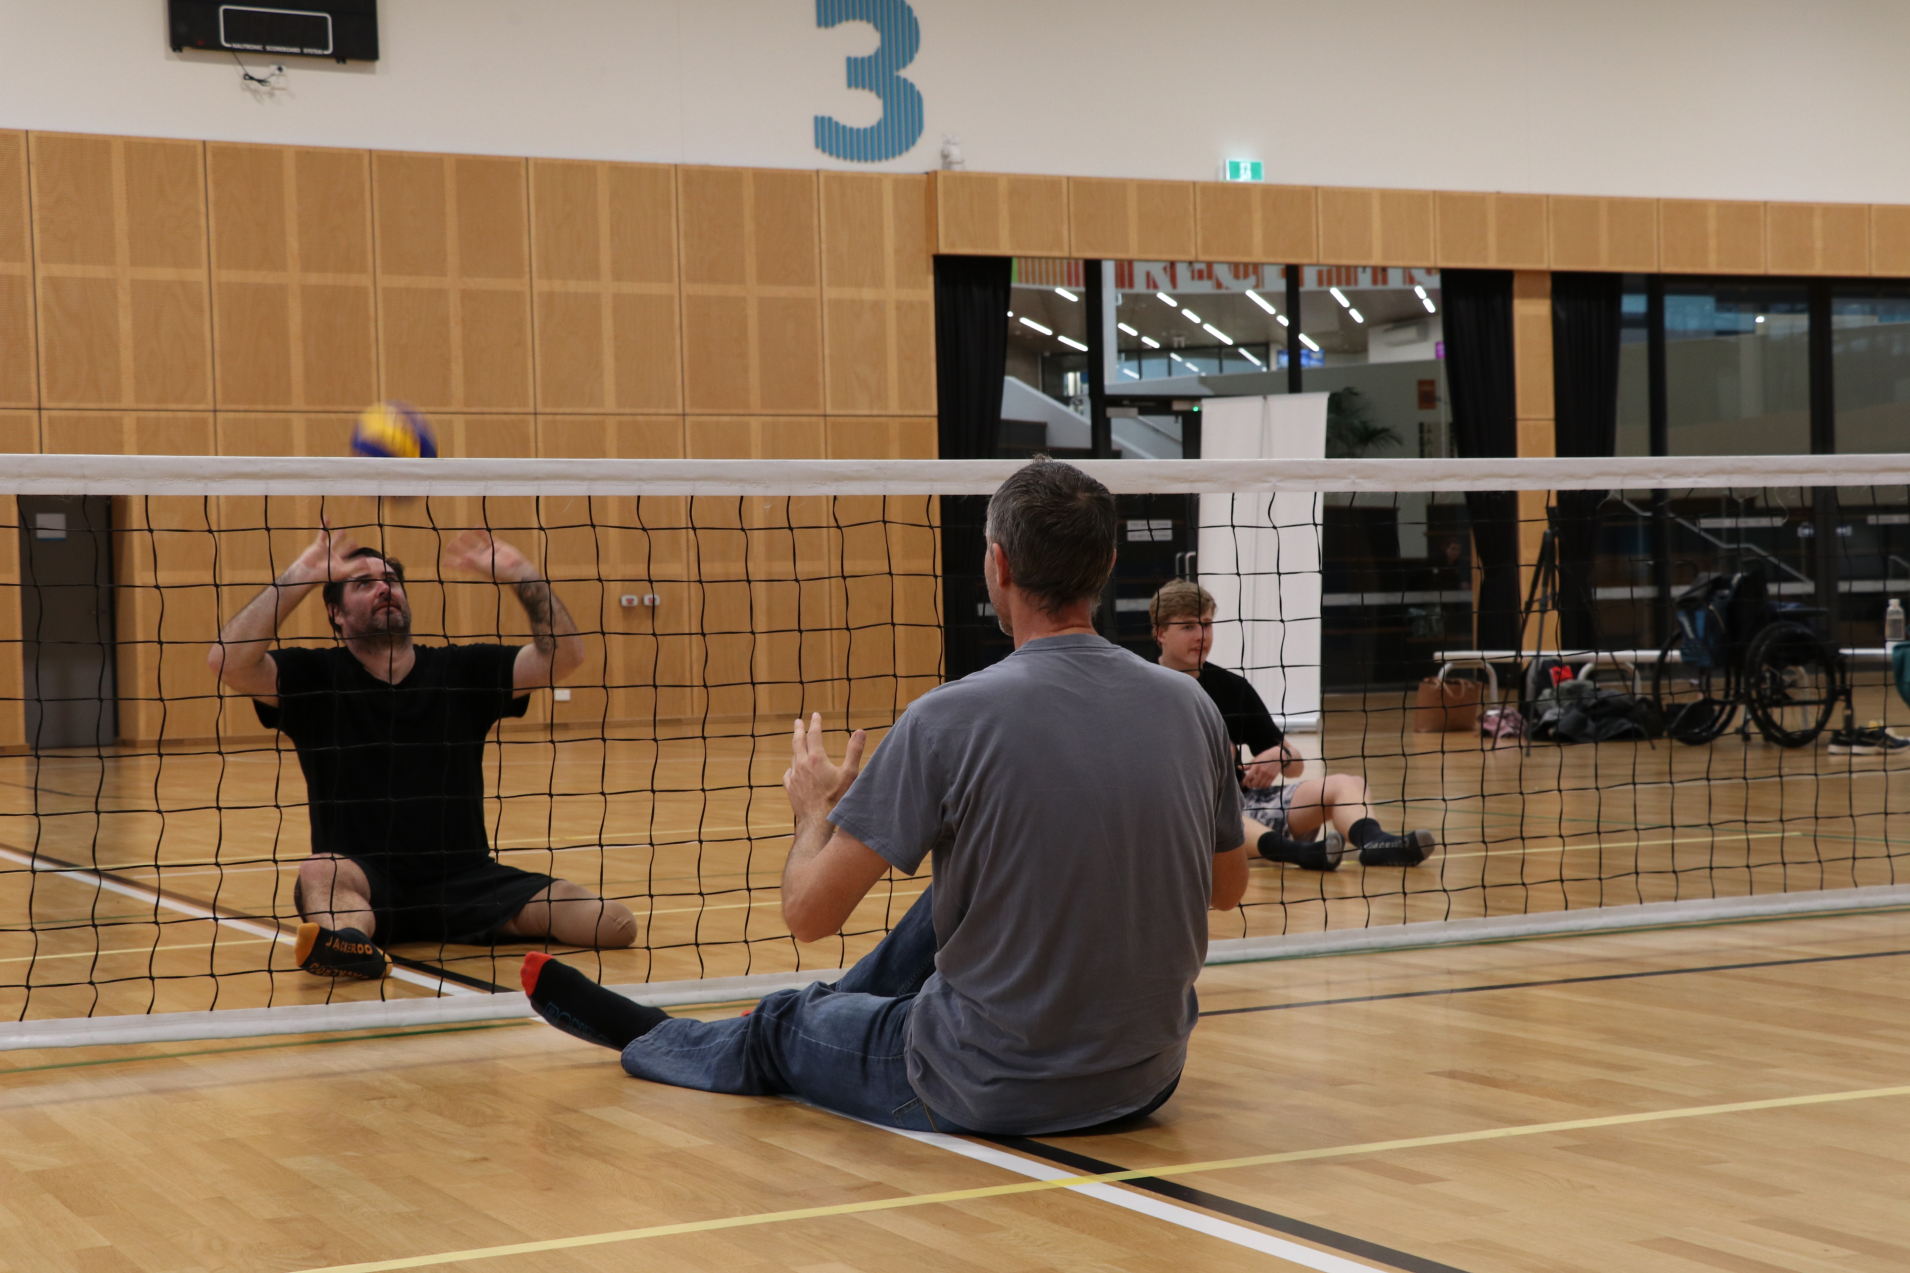 two seated volleyball players hit the ball to each other over a net